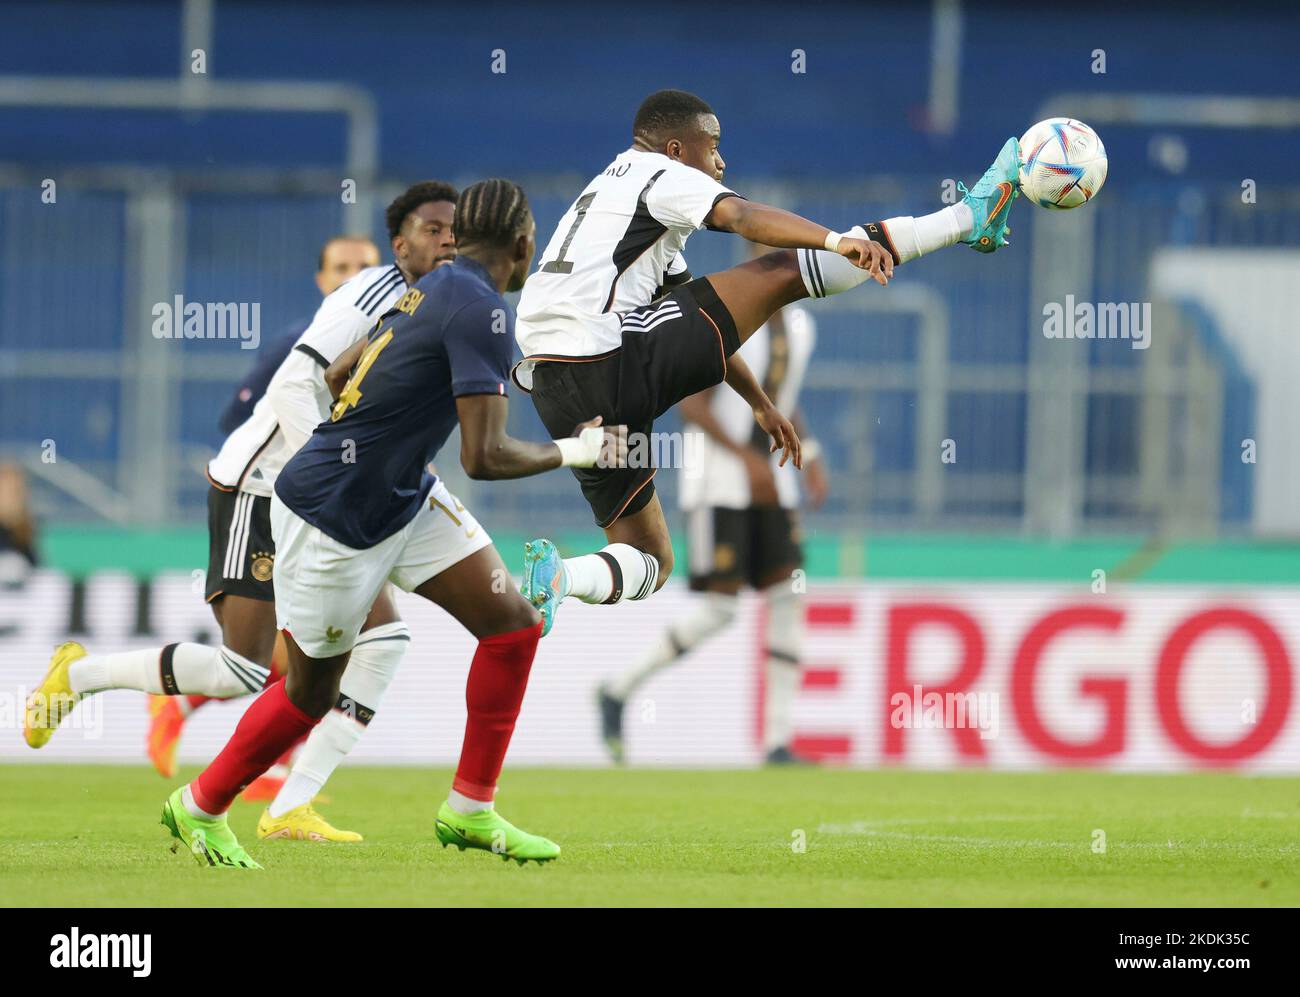 Magdeburg, Deutschland. 23rd Sep, 2022. firo: 23.09.2022, football, GERMANY, U21, U 21 NATIONAL TEAM Germany - France duels, Youssoufa Moukoko in front of Ergo Credit: dpa/Alamy Live News Stock Photo